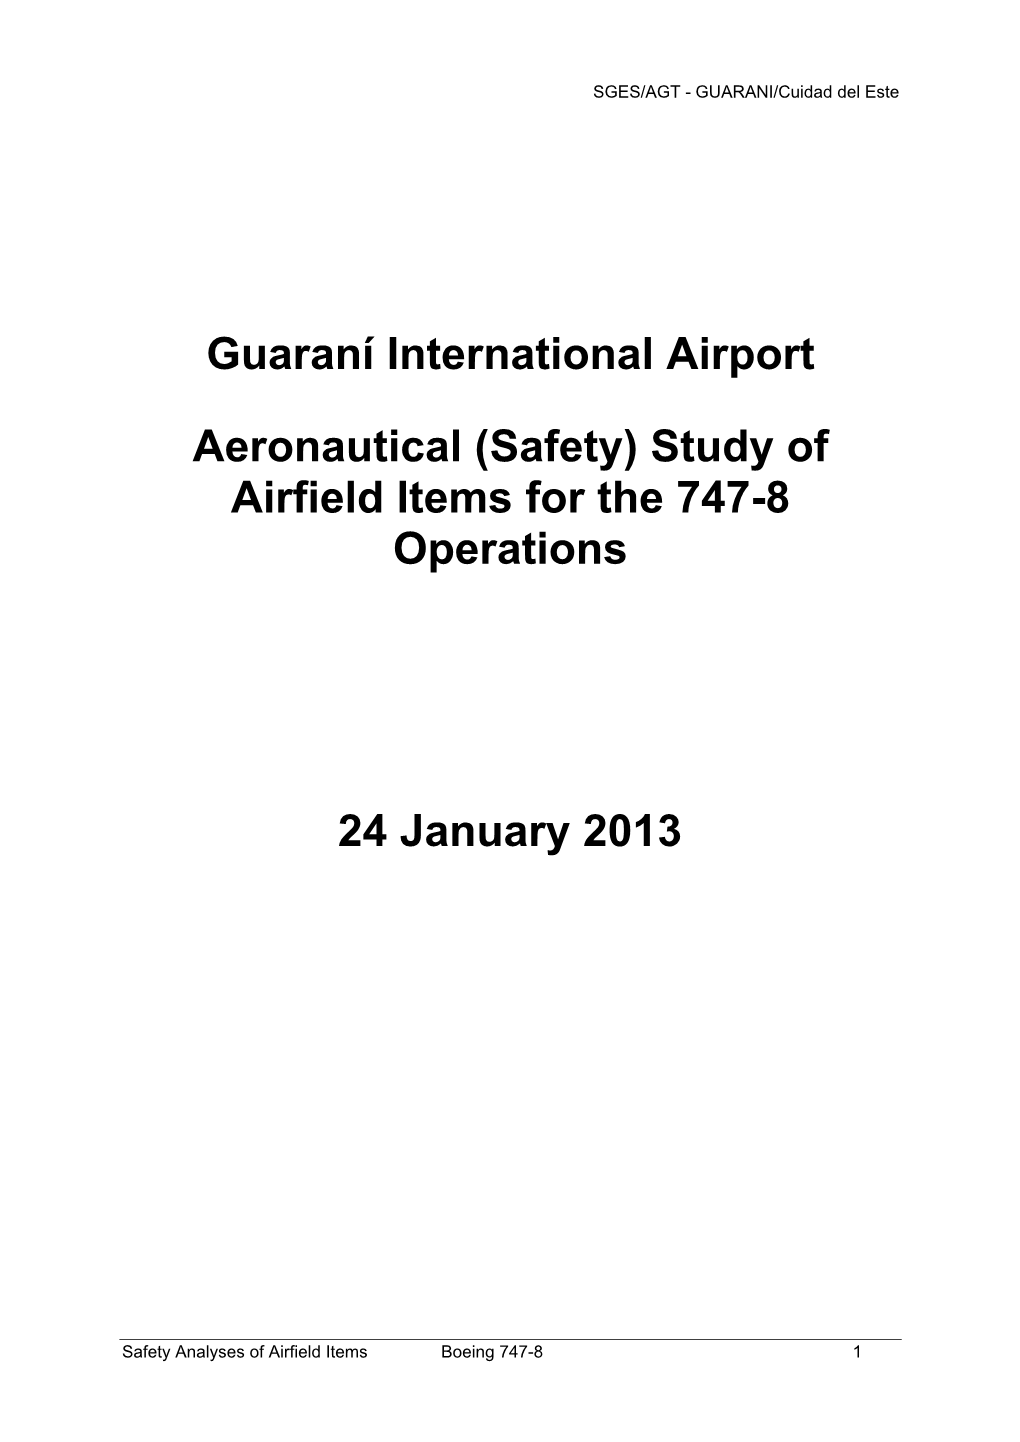 (Safety) Study of Airfield Items for the 747-8 Operations 24 January 2013